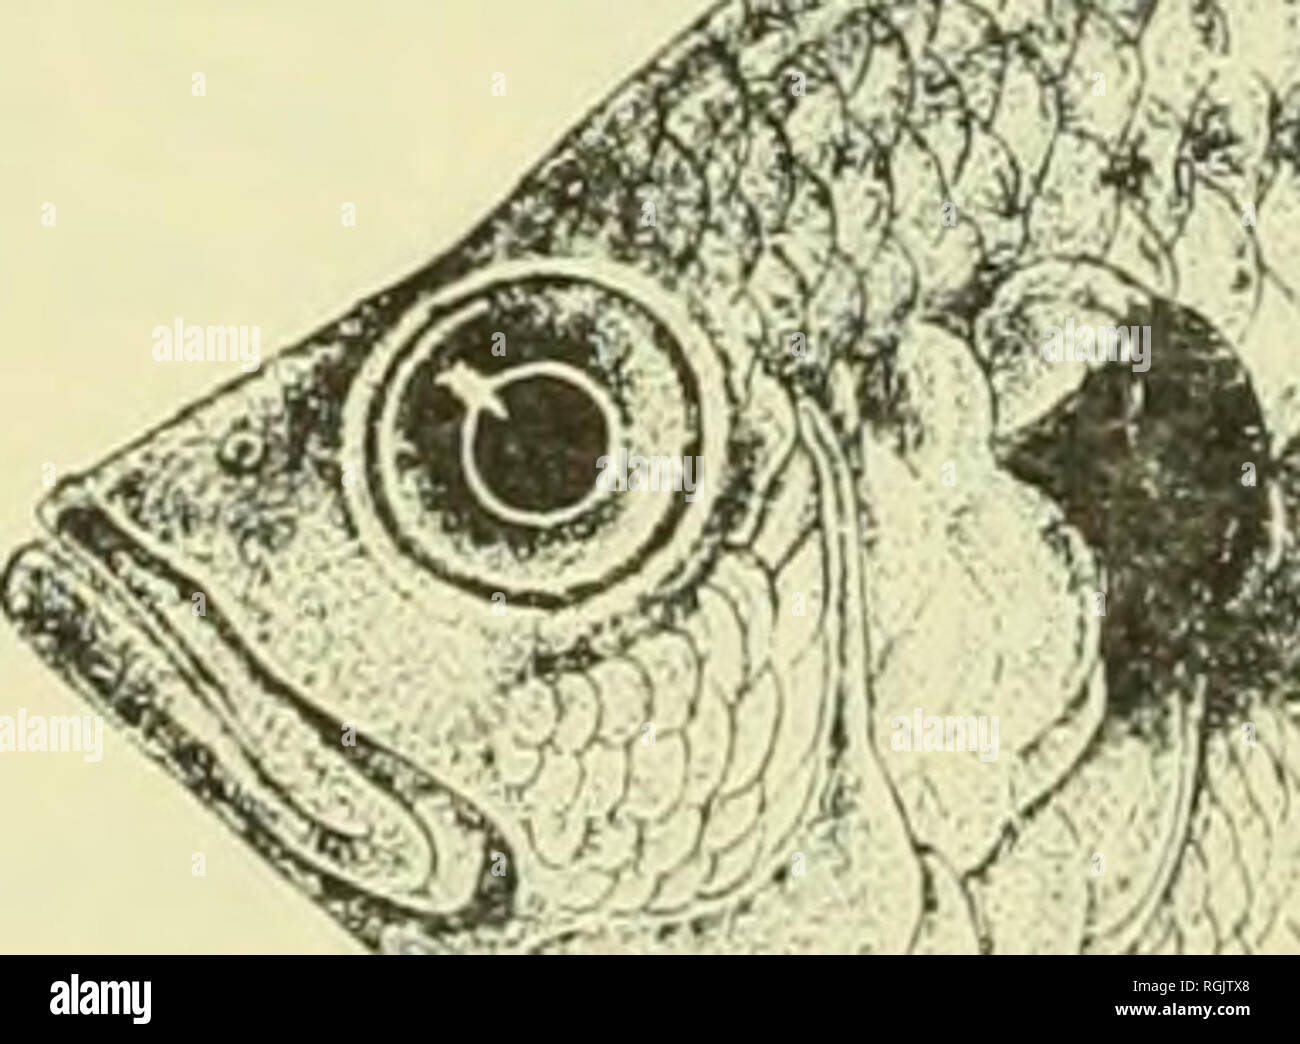 . Bulletin of the British Museum (Natural History). E. TREWAVAS INTERRELATIONSHIPS OF THE SPECIES OF PELMATOCHROMIS It is to P. nigrofasciatus and not P. ocellifer that Thys is referring when he writes (1968a) that P. congicus is a specialized form derived from P. ocellifer. With the substitution of the name I would agree with this opinion, but the speciaUzation has gone so far that P. congicus is best considered as a separate genus. P. ocellifer and P. huettikoferi are alike in the dentition of jaws and pharynx in which they contrast with P. nigrofasciatus, especially developmentally. On the  Stock Photo